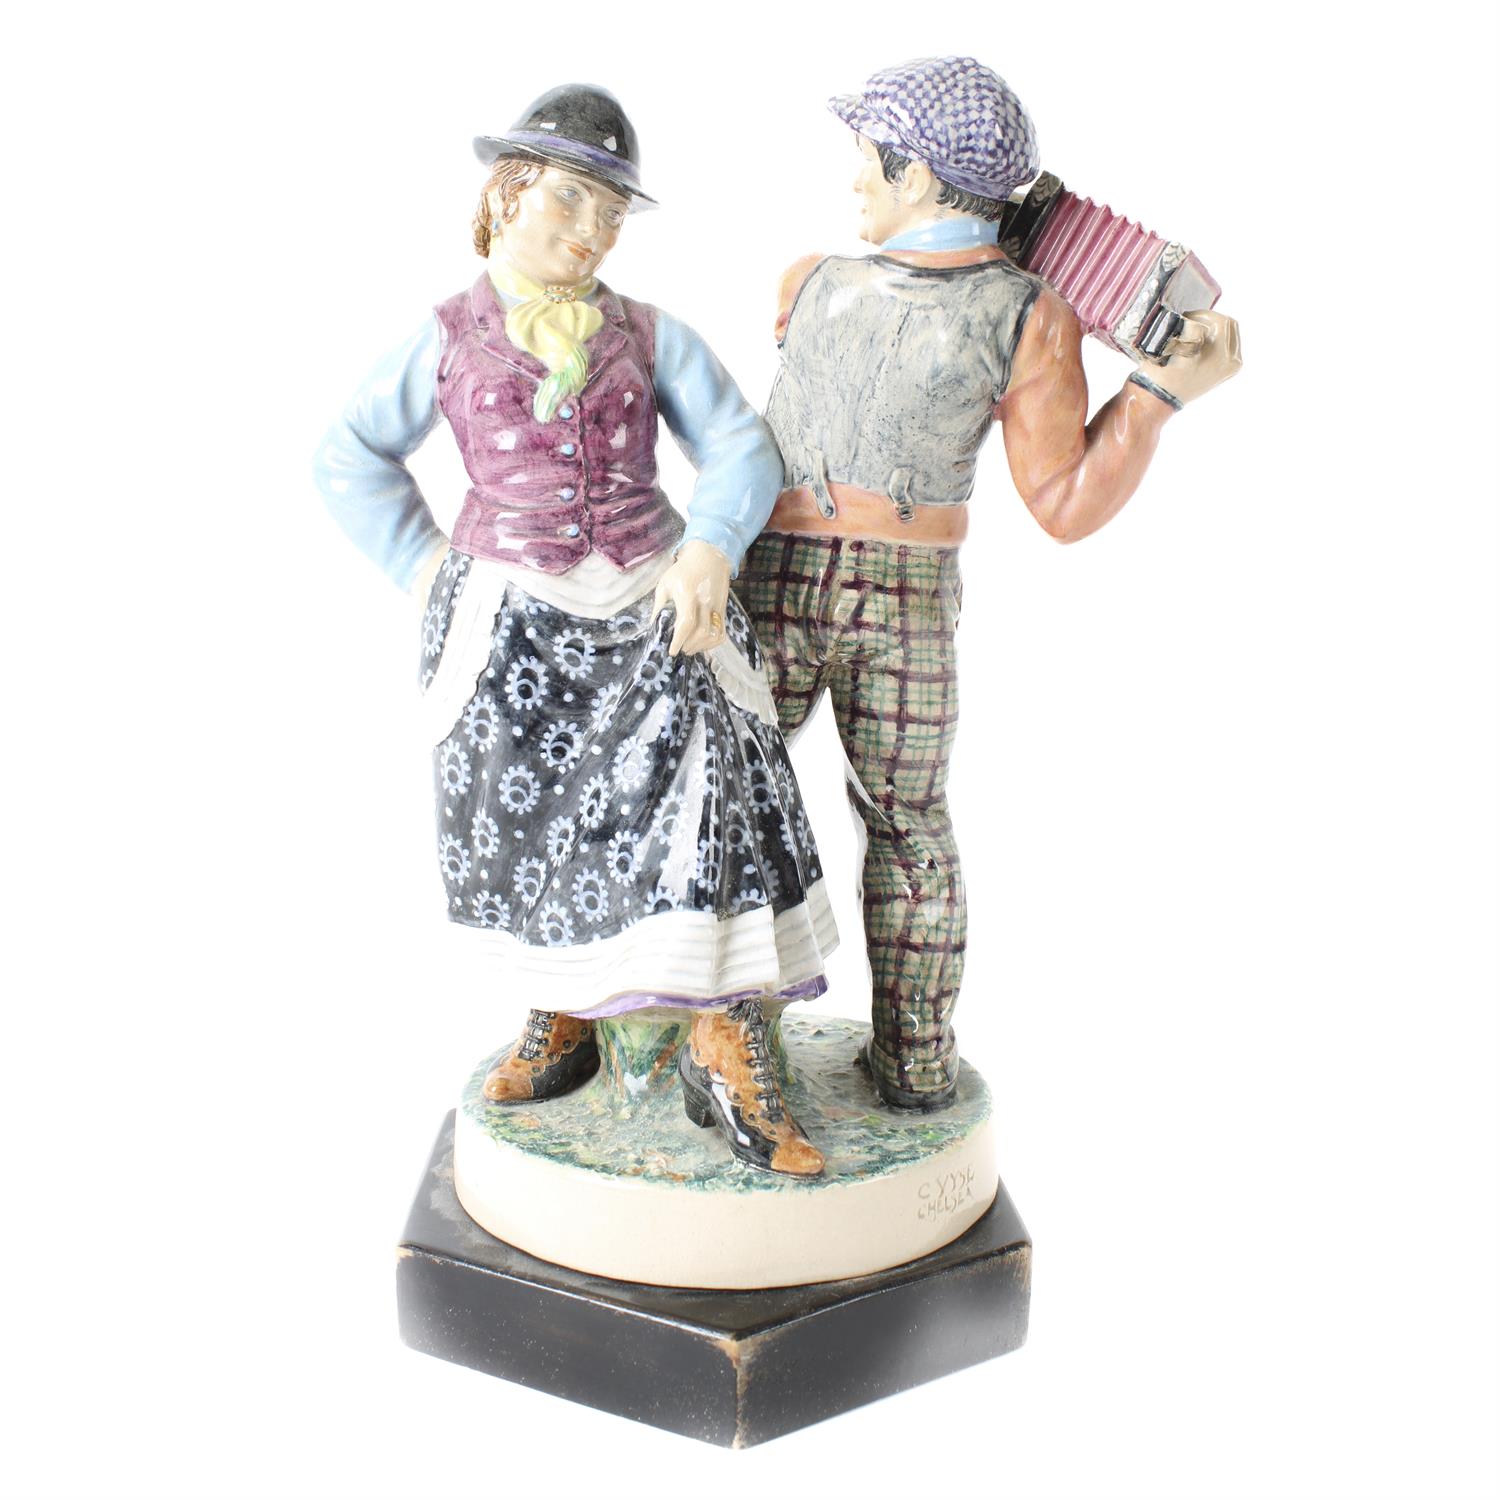 Charles Vyse 'The Dancing Gypsies' figural group - Image 2 of 9